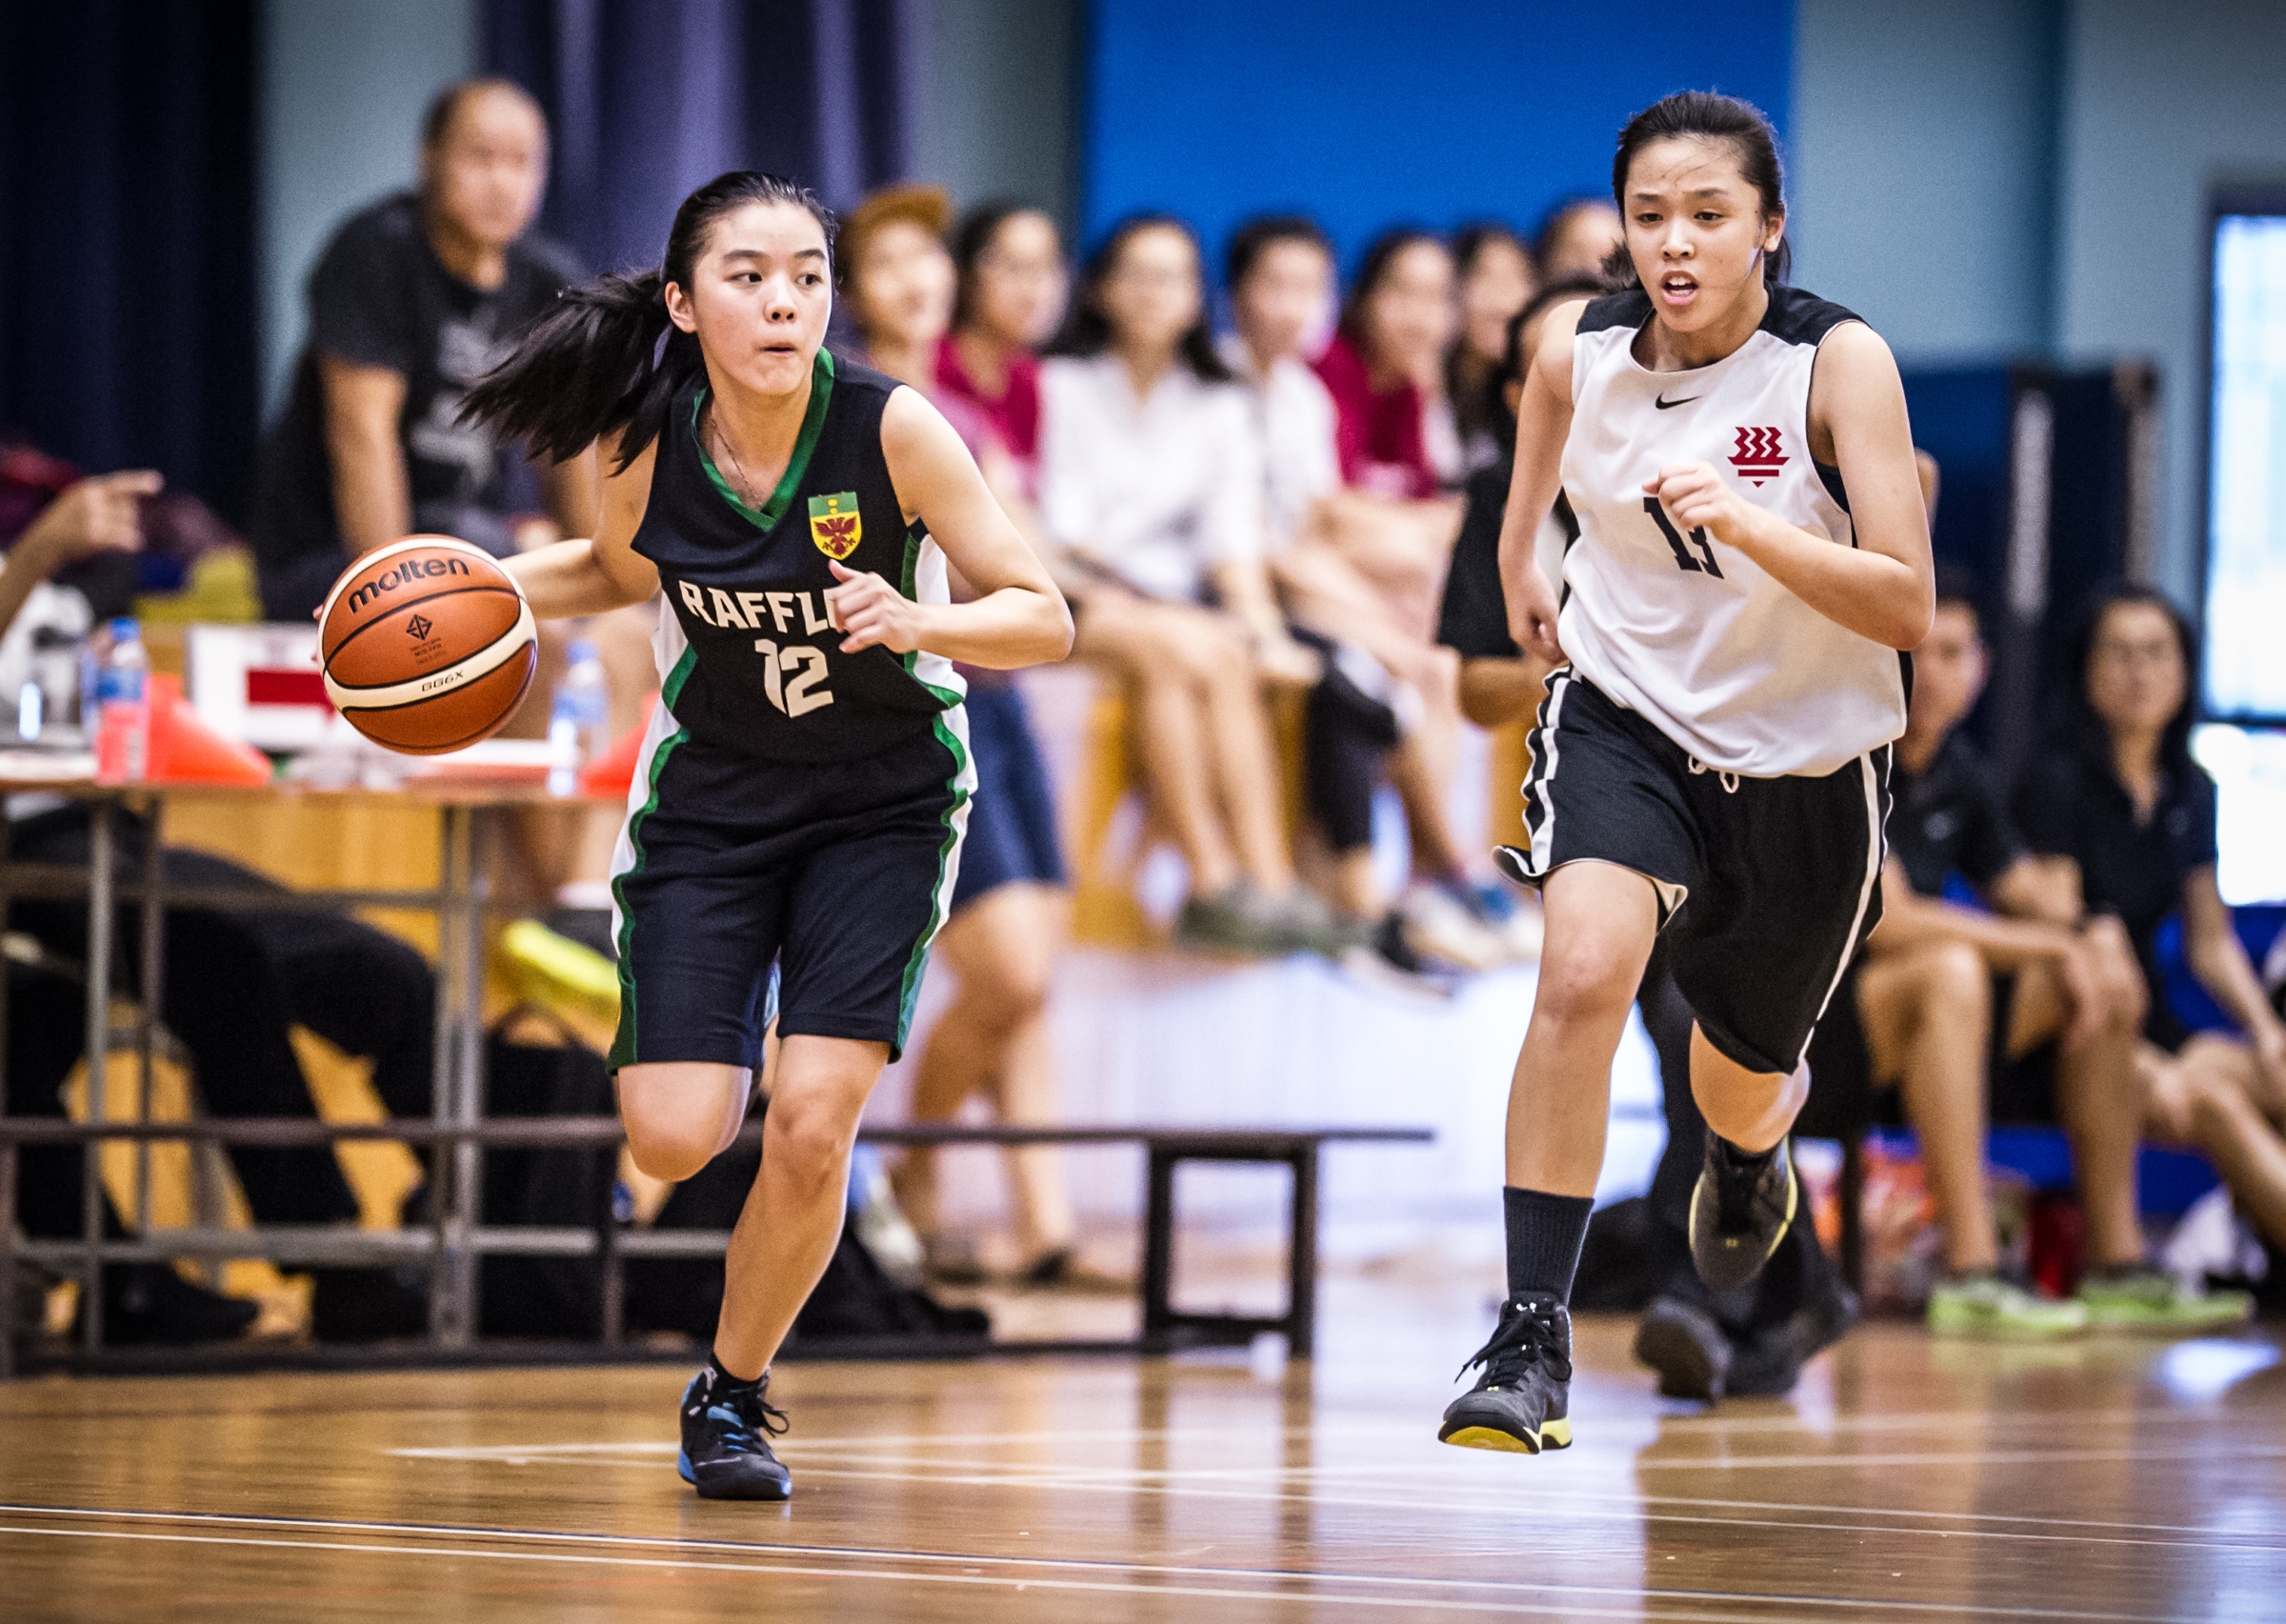 A Basketball player drives with the ball during a National Schools match at the Jurong East Sports Complex.